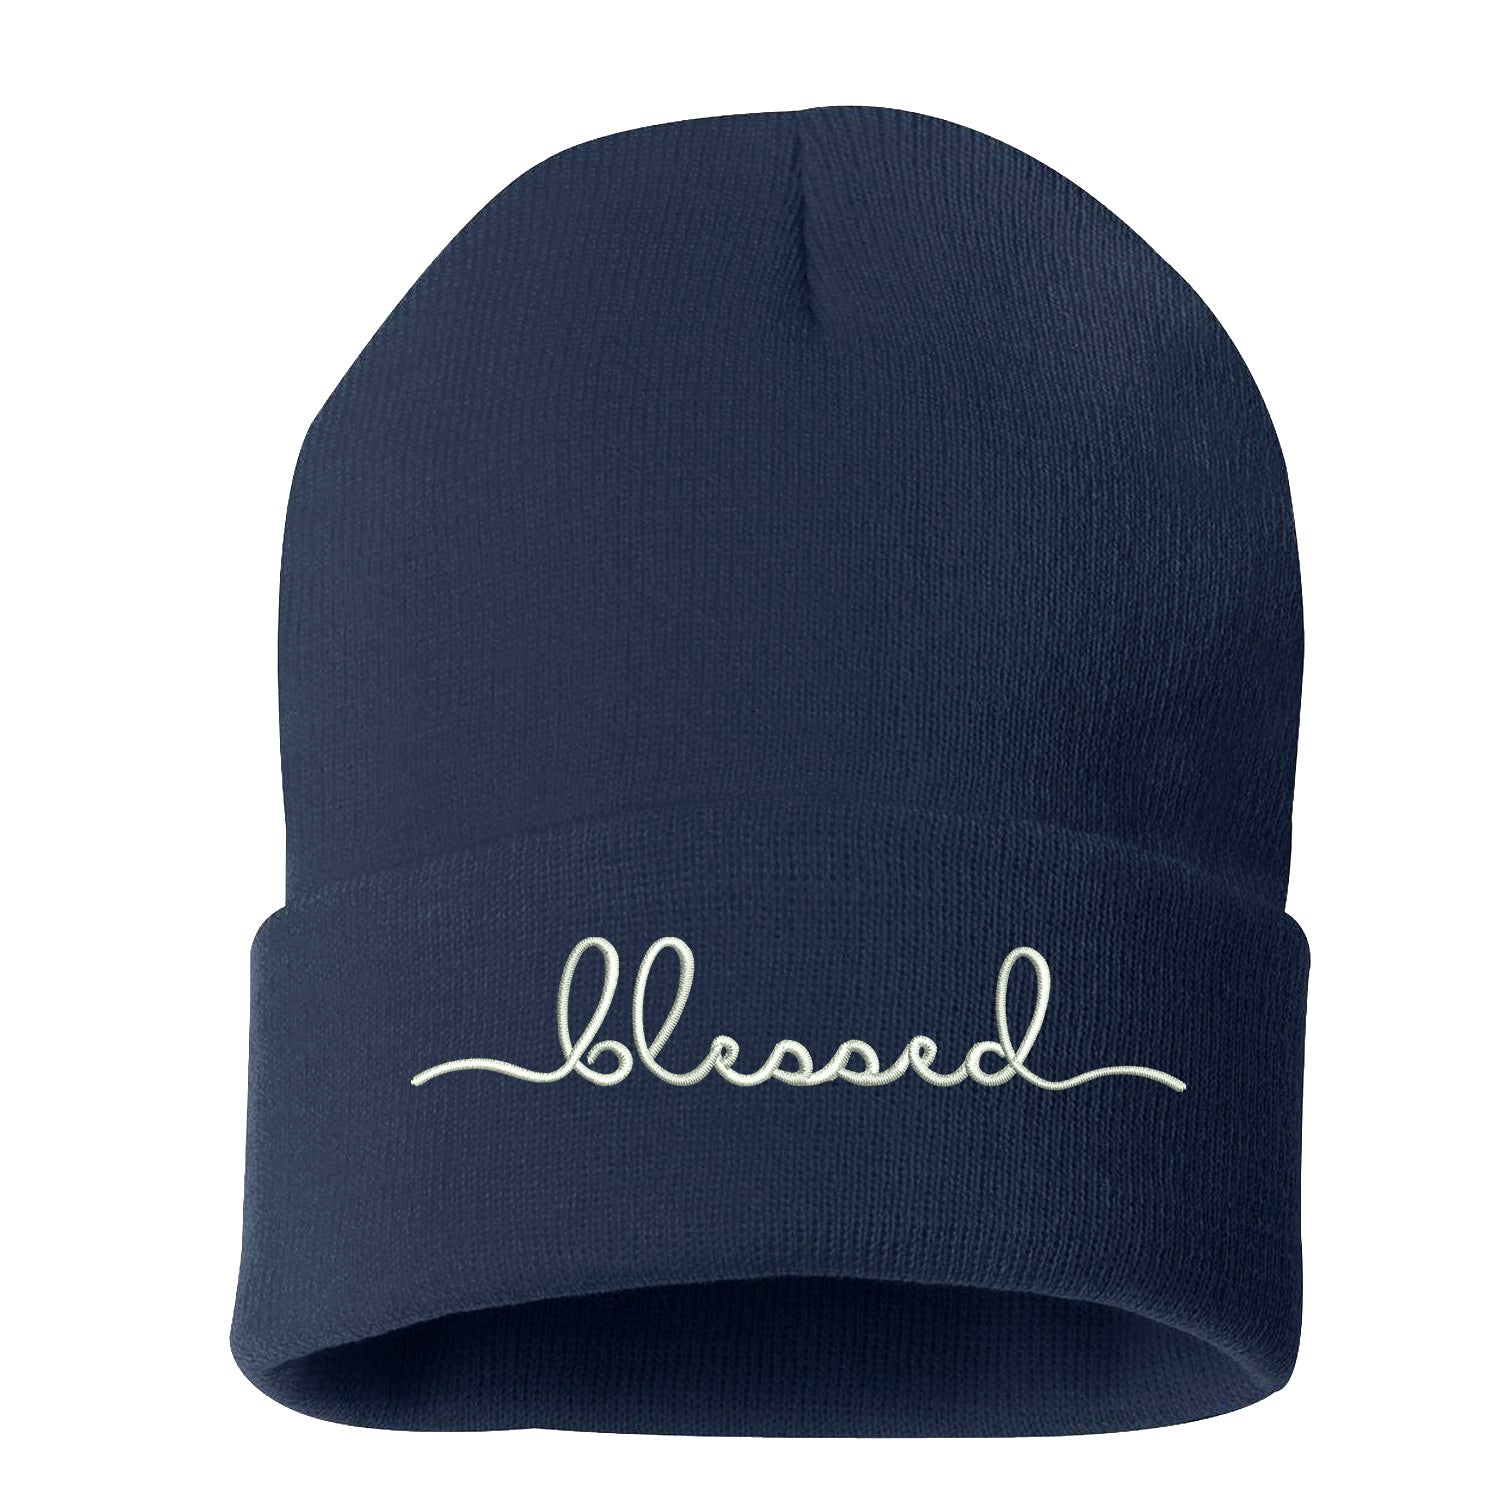 Unisex Blessed Cuffed Beanie Hat, Embroidered Beanie Cap, Cuffed Beanie, Blessed Beanie Hat, Custom Embroidery, Blessed, Thanksgiving Hat, Cursive Text, Embroidered Text, Navy Beanie Cap Hat, DSY Lifestyle Beanie, Made in LA